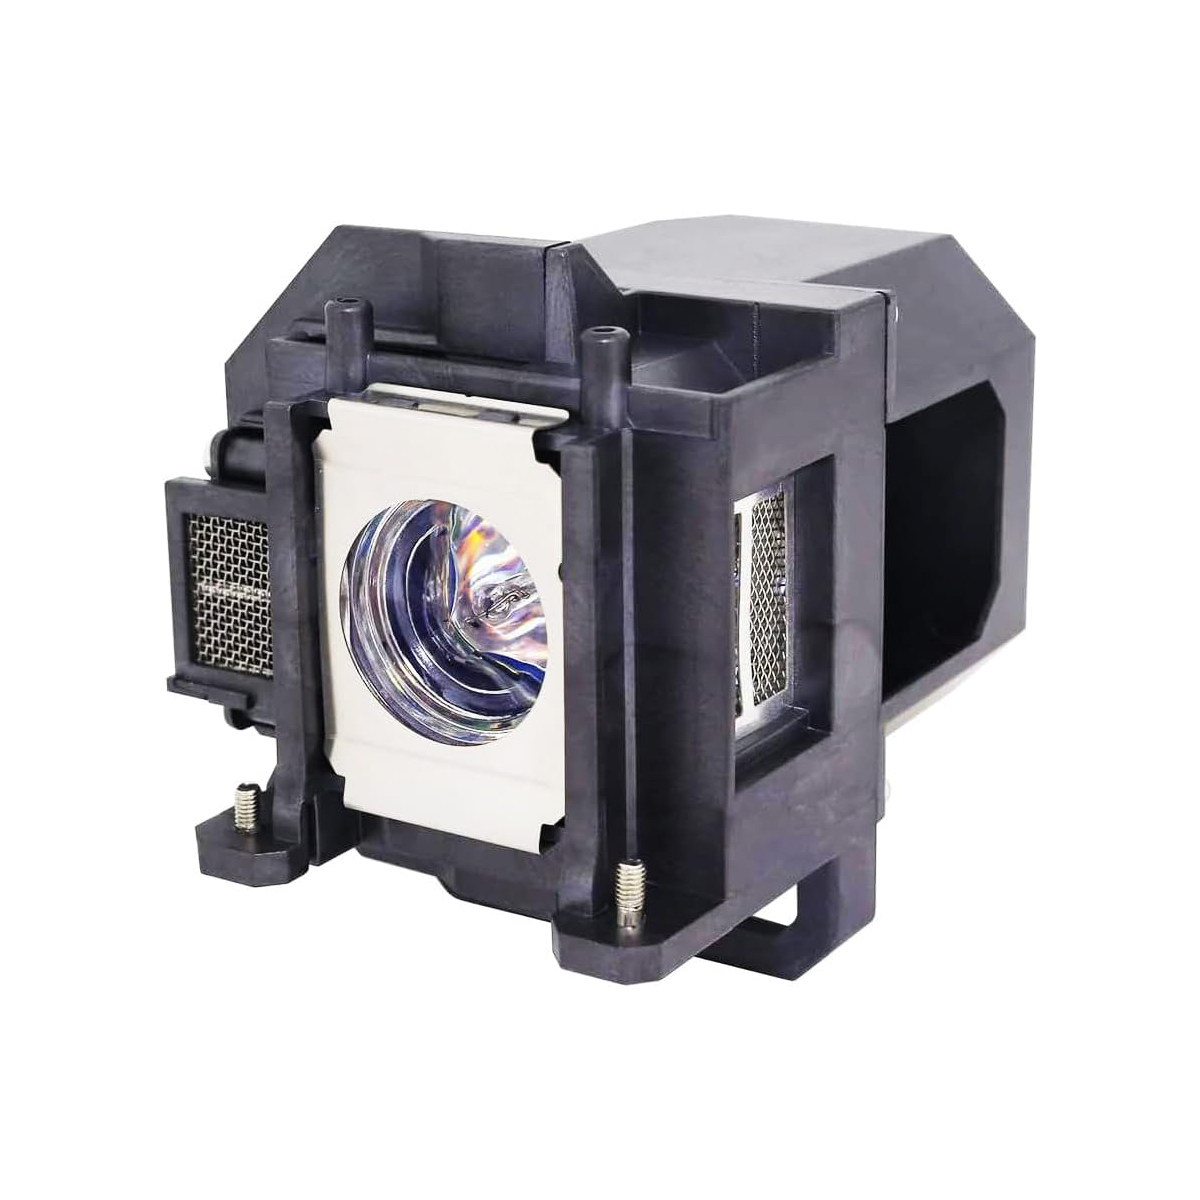 Replacement Projector lamp ELPLP53 For Epson EB-1830 EB-1900 EB-1910 EB-1915